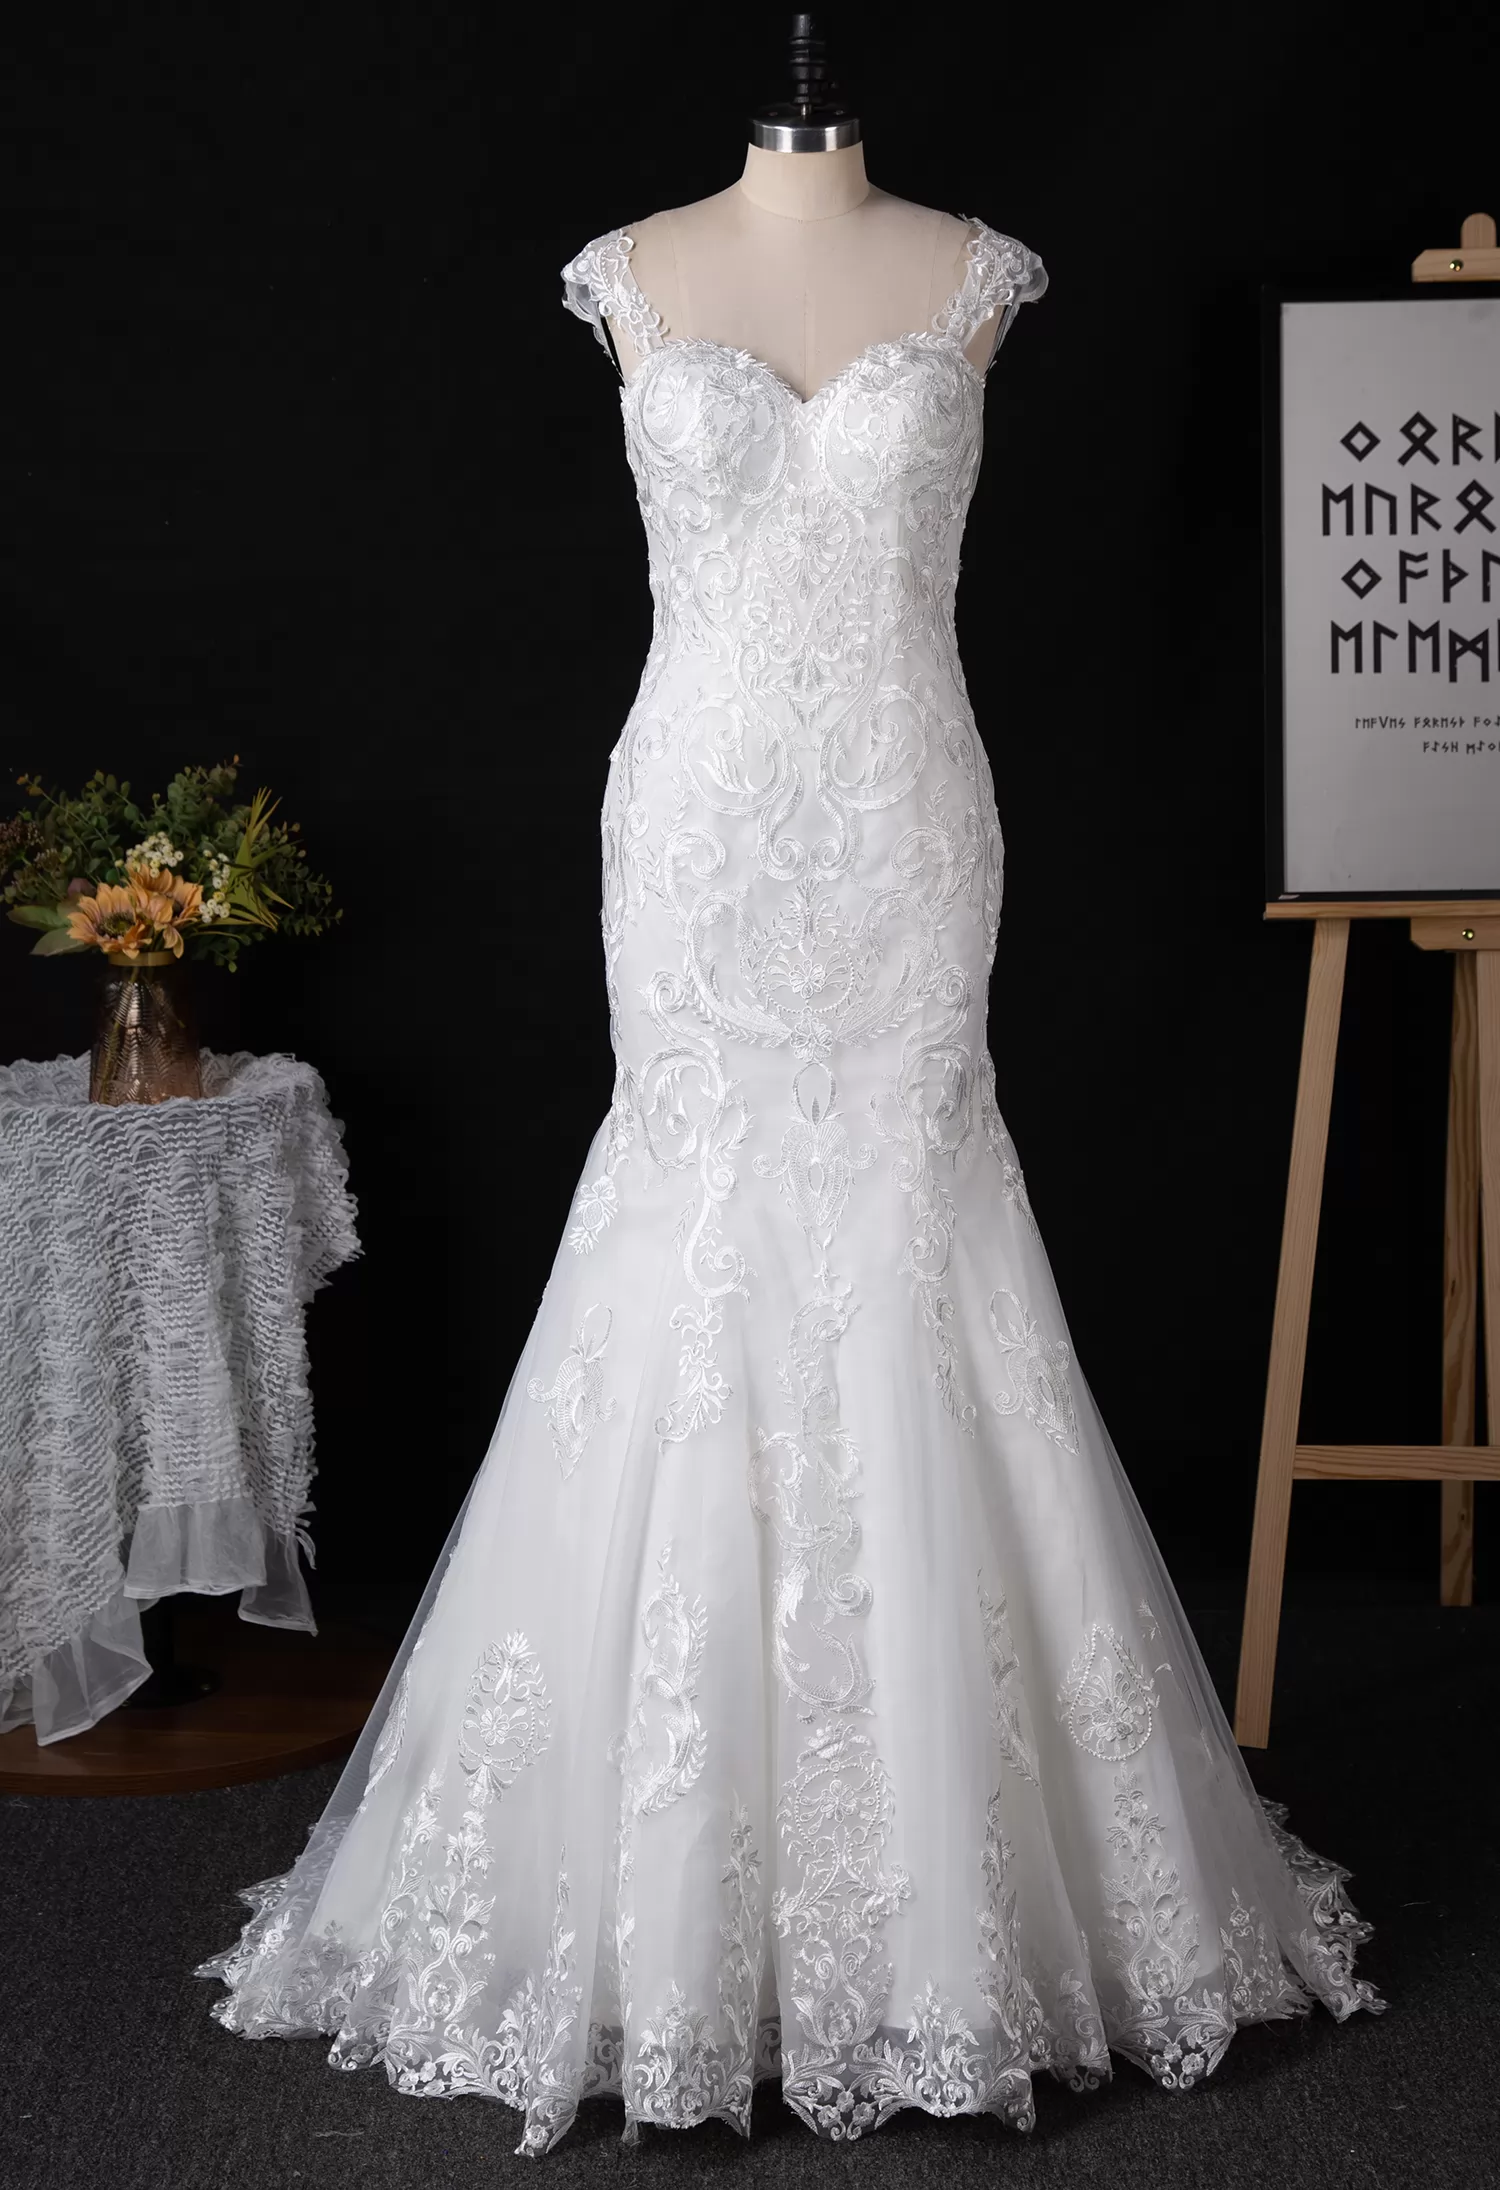 Mermaid Wedding Dress With Scalloped Lace Train